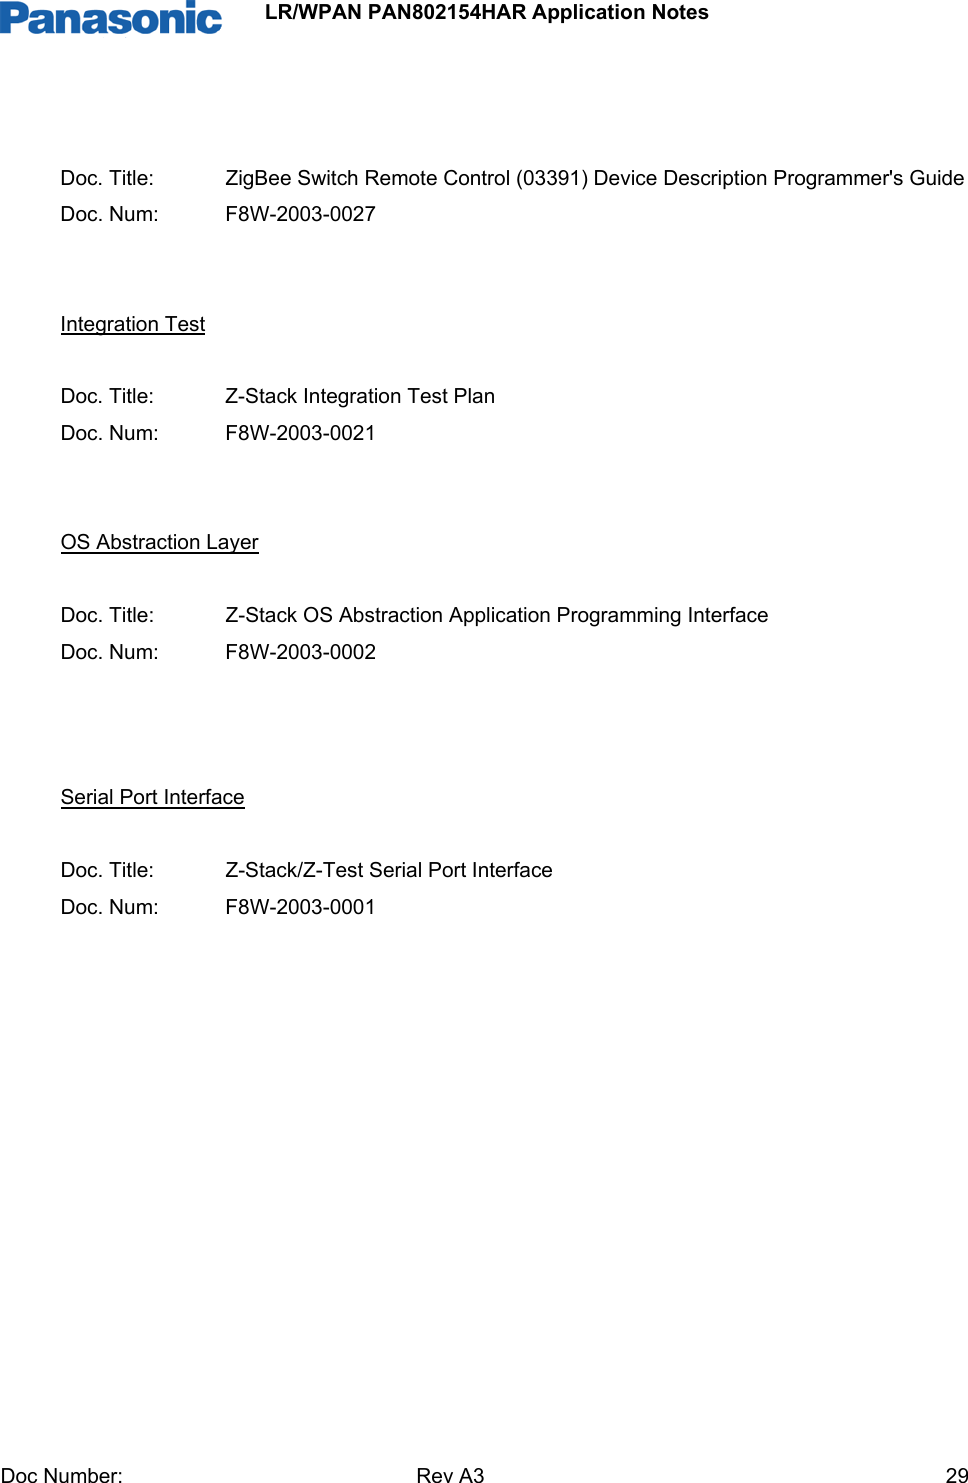                 LR/WPAN PAN802154HAR Application Notes Doc Number:   Rev A3    29  Doc. Title:   ZigBee Switch Remote Control (03391) Device Description Programmer&apos;s Guide Doc. Num:   F8W-2003-0027   Integration Test  Doc. Title:   Z-Stack Integration Test Plan Doc. Num:   F8W-2003-0021   OS Abstraction Layer  Doc. Title:   Z-Stack OS Abstraction Application Programming Interface Doc. Num:   F8W-2003-0002    Serial Port Interface  Doc. Title:   Z-Stack/Z-Test Serial Port Interface Doc. Num:   F8W-2003-0001            